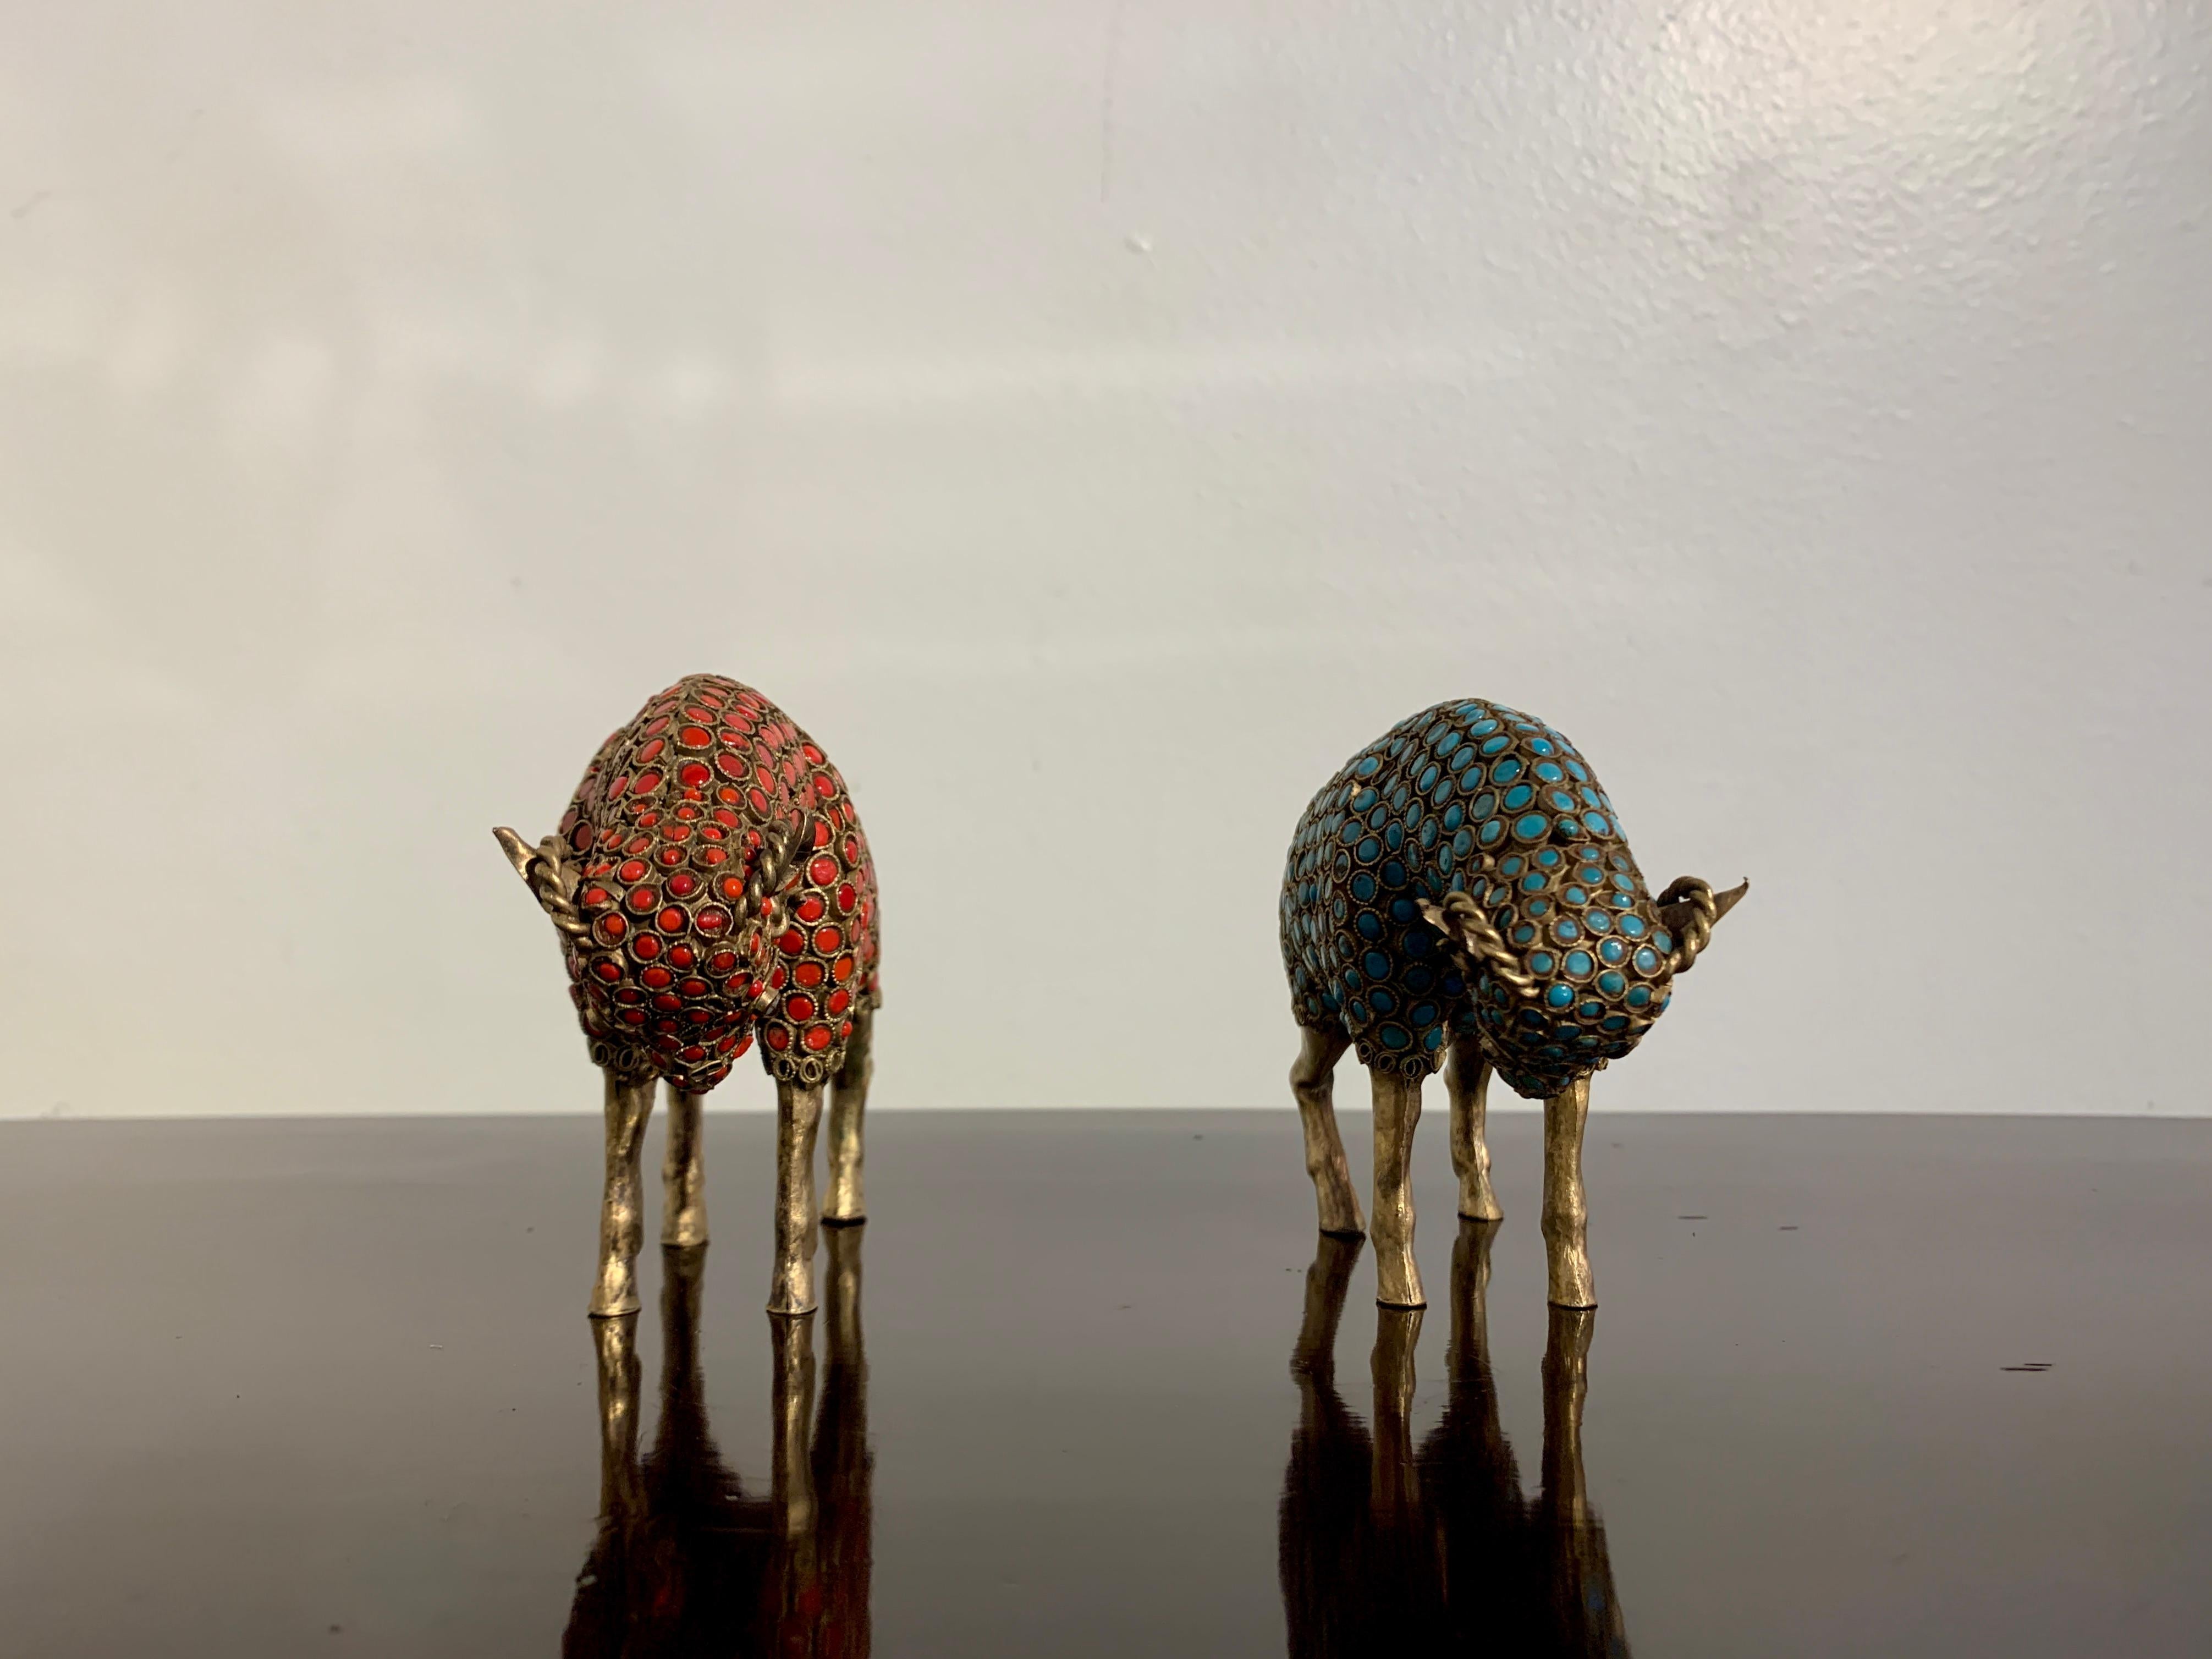 A pair of wonderful vintage Nepalese handicraft figures of confronting rams, brass sheet and wire, with glass bead inlays imitating coral and turquoise, circa 1970's, 

The rams portrayed with their heads down as if preparing to headbutt one